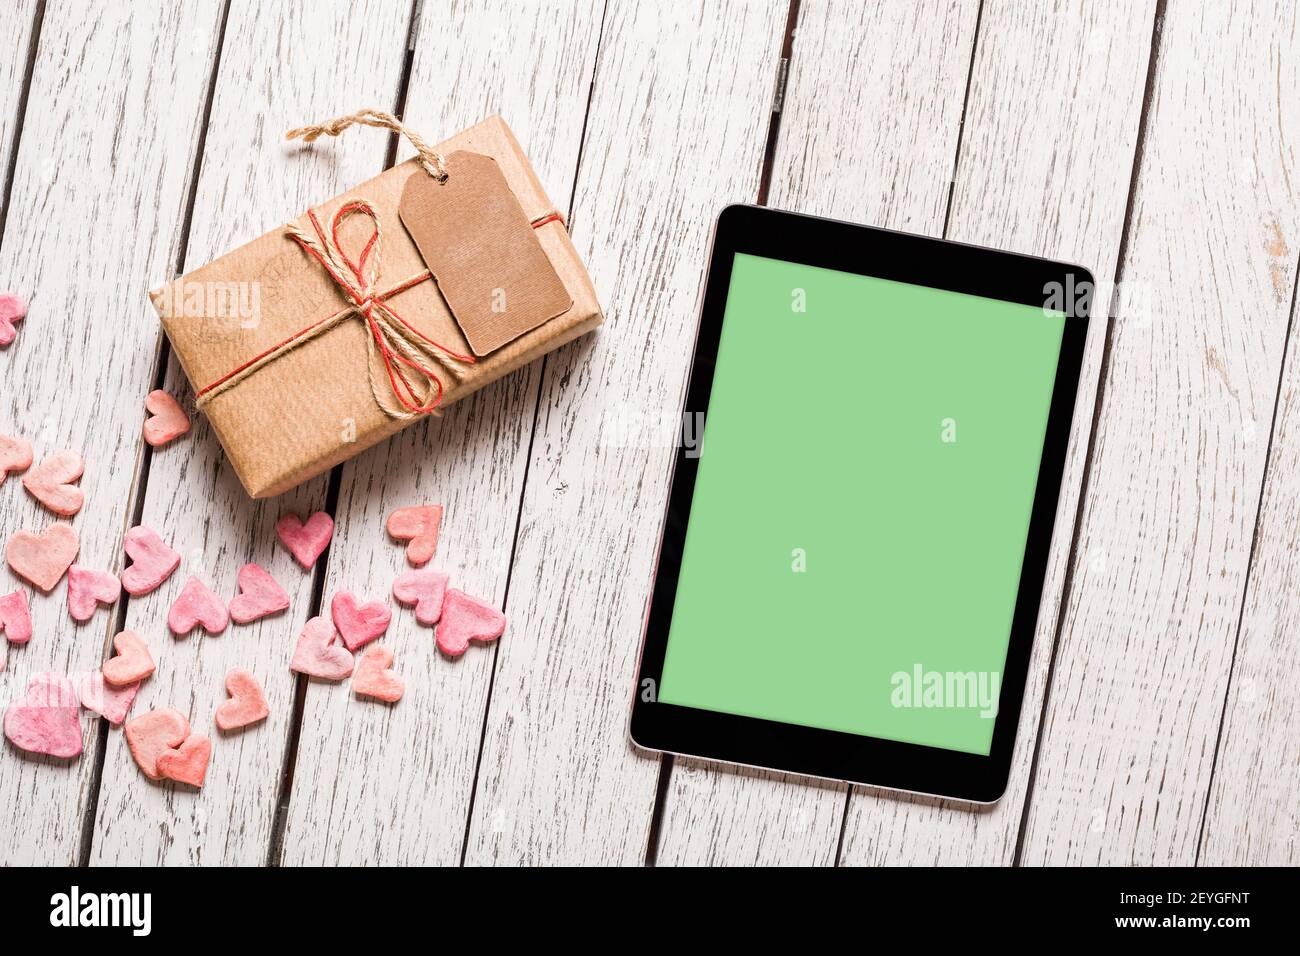 Mockup of tablet pc with gift box Stock Photo